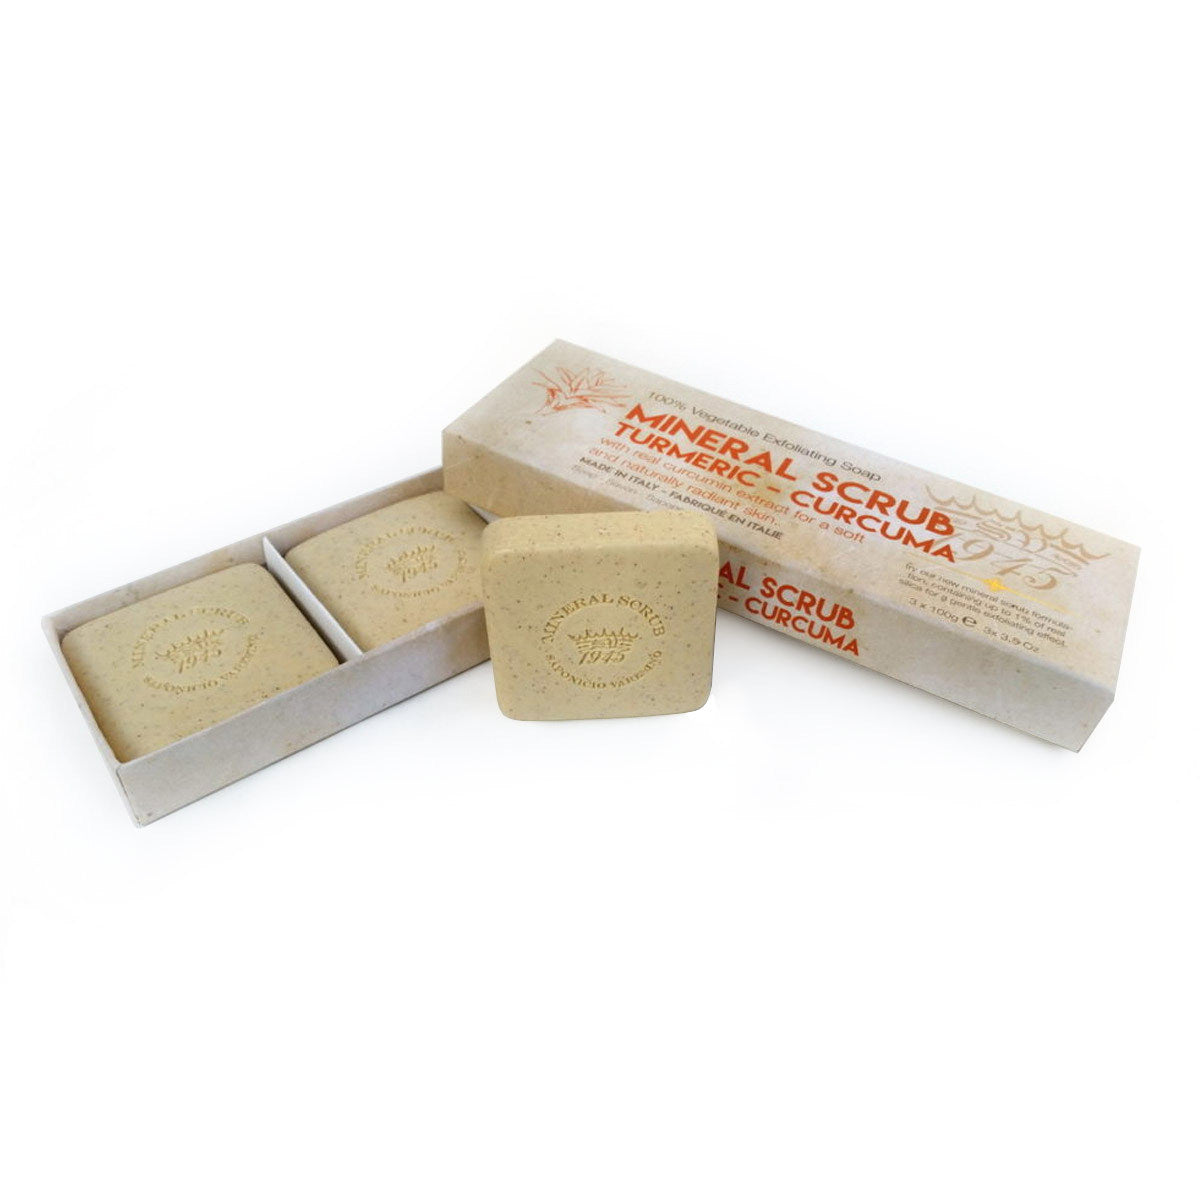 Primary image of Turmeric Mineral Scrub Soap Set